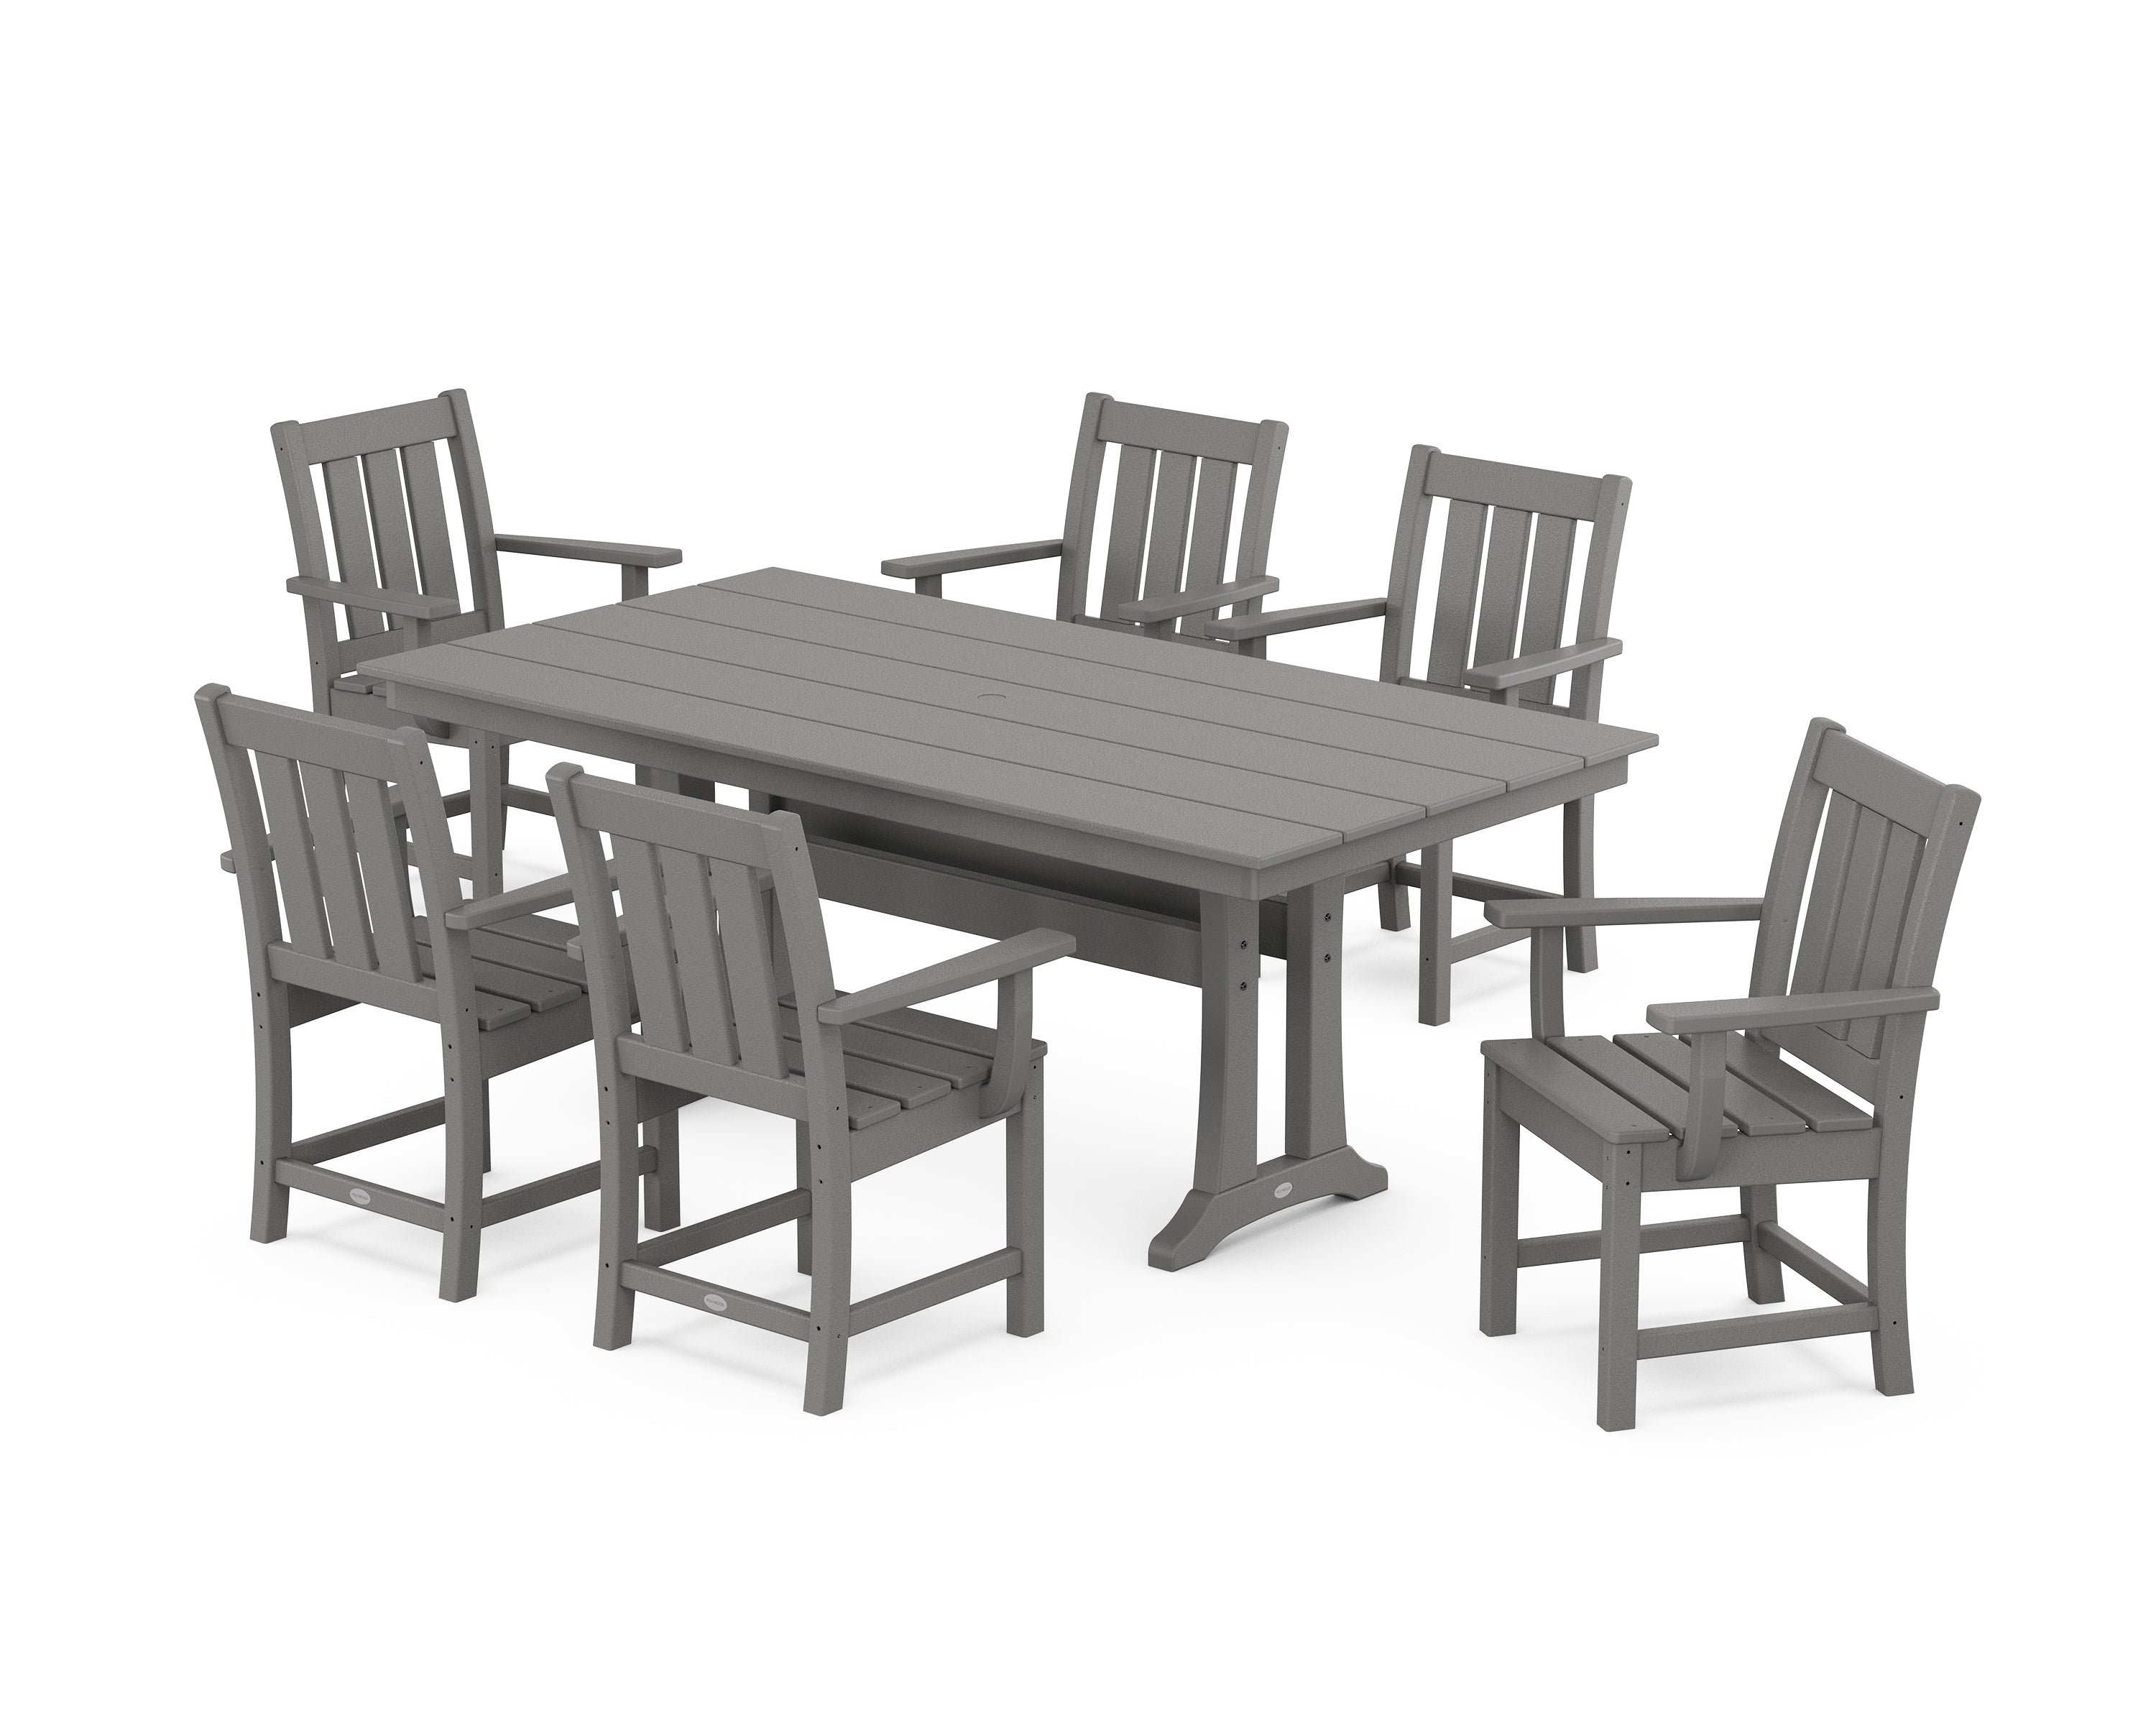 POLYWOOD® Oxford Arm Chair 7-Piece Farmhouse Dining Set with Trestle Legs in Slate Grey